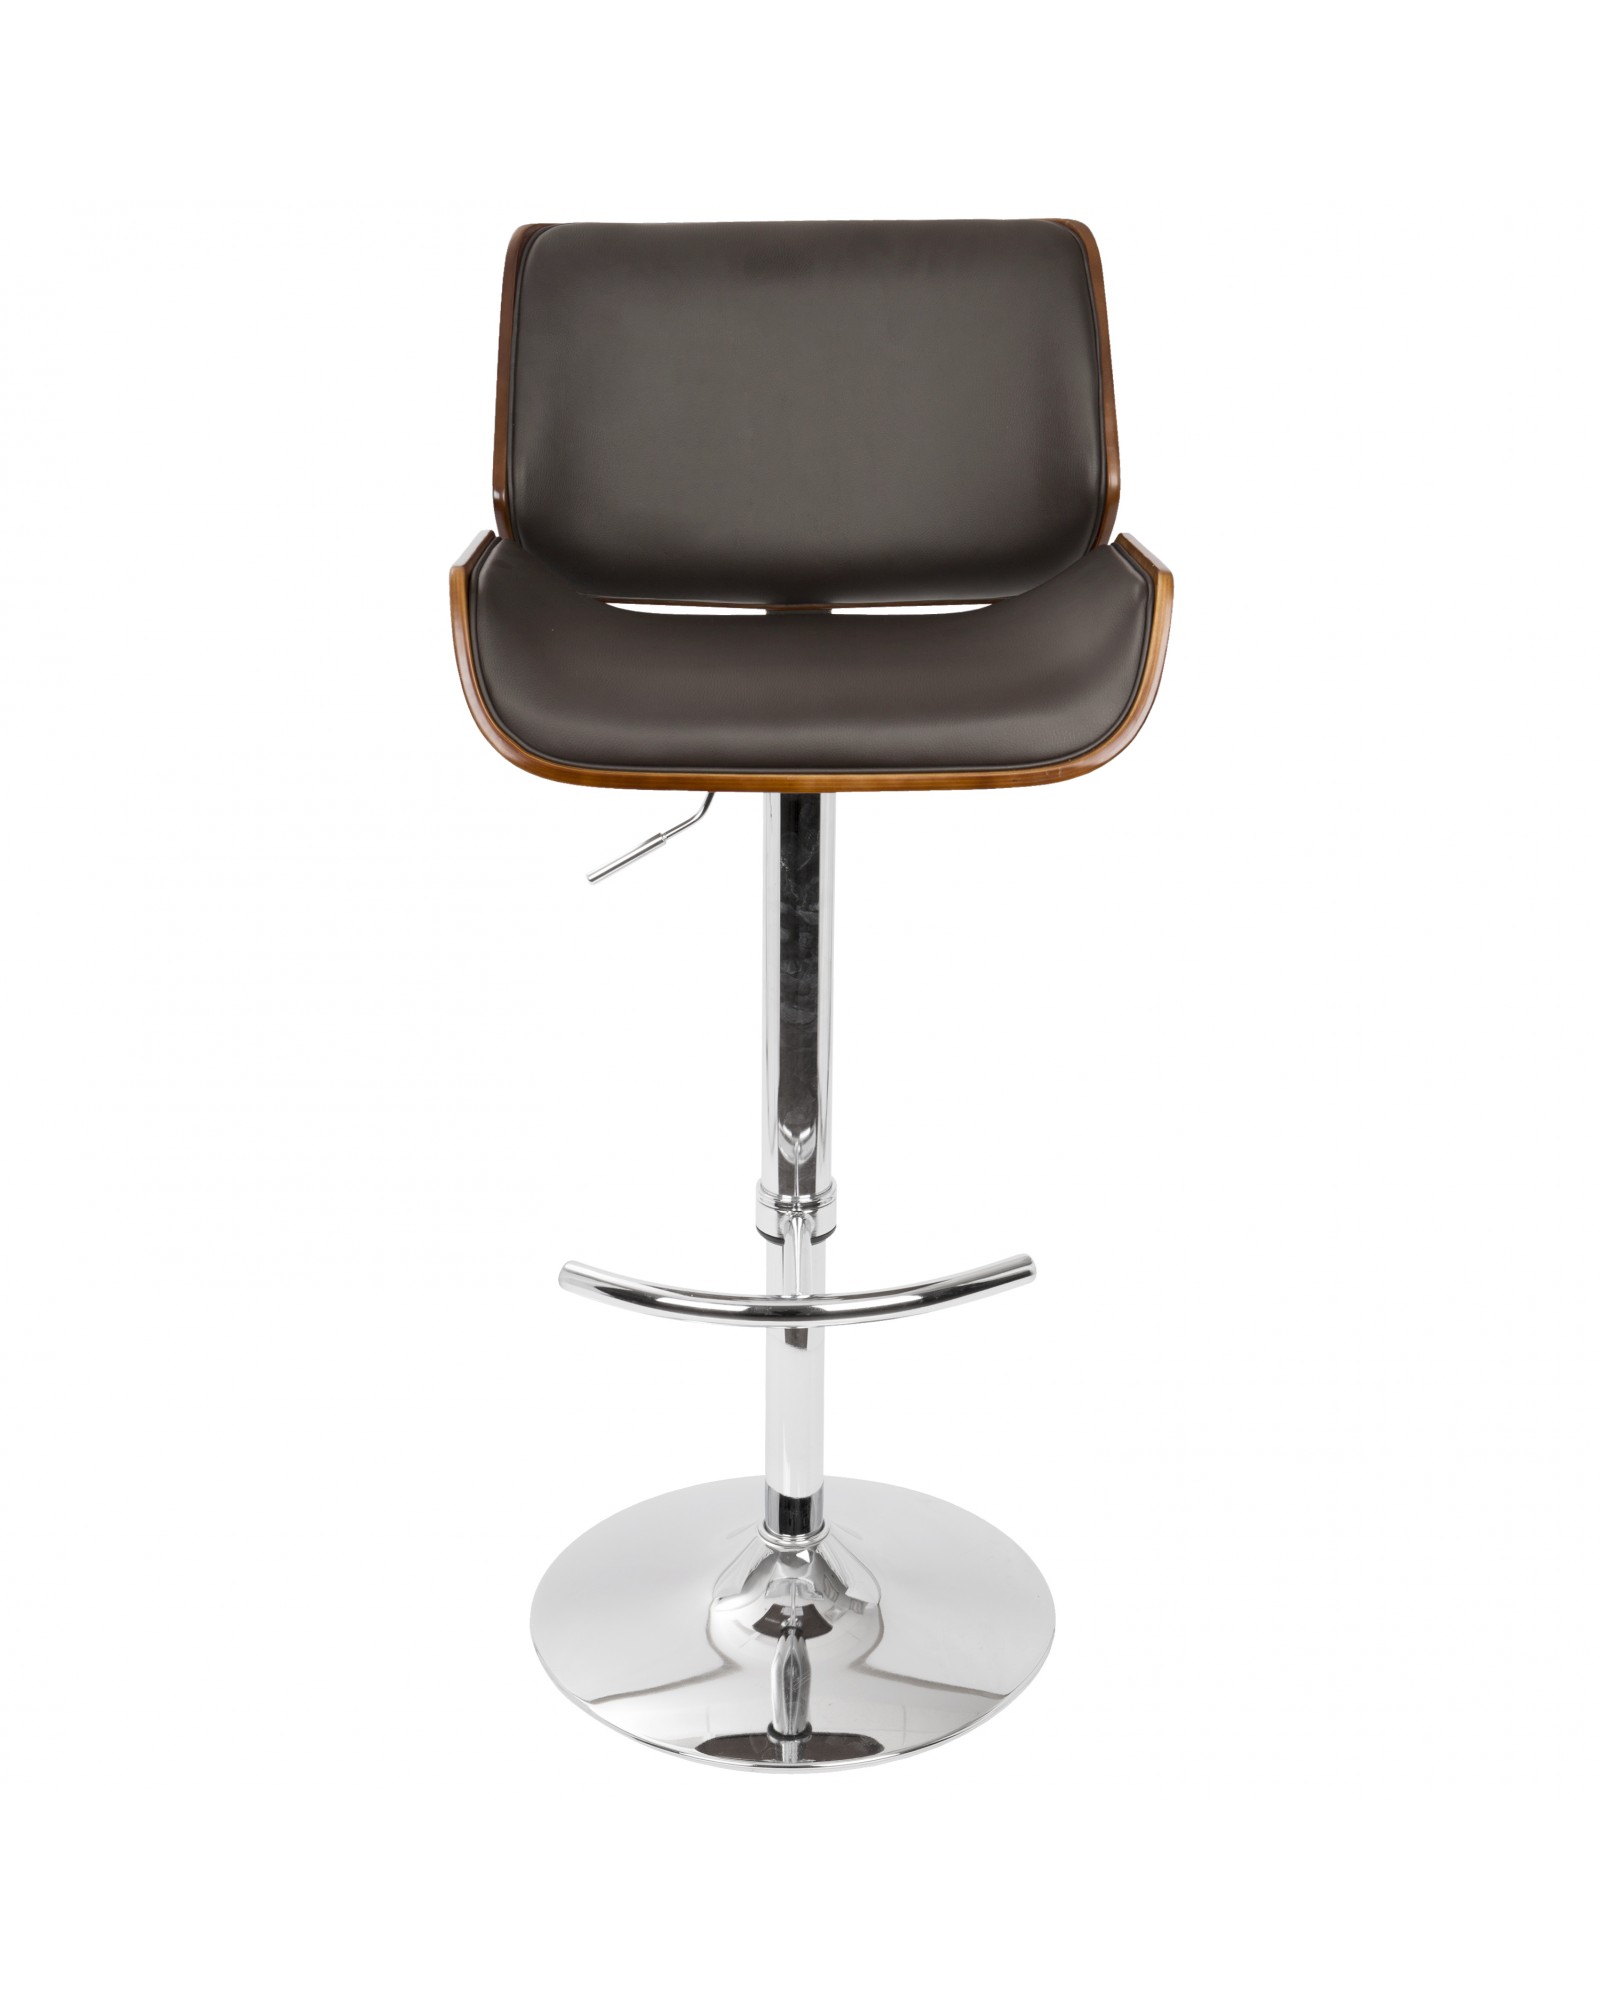 Santi Mid-Century Modern Adjustable Barstool with Swivel in Cherry and Brown Faux Leather